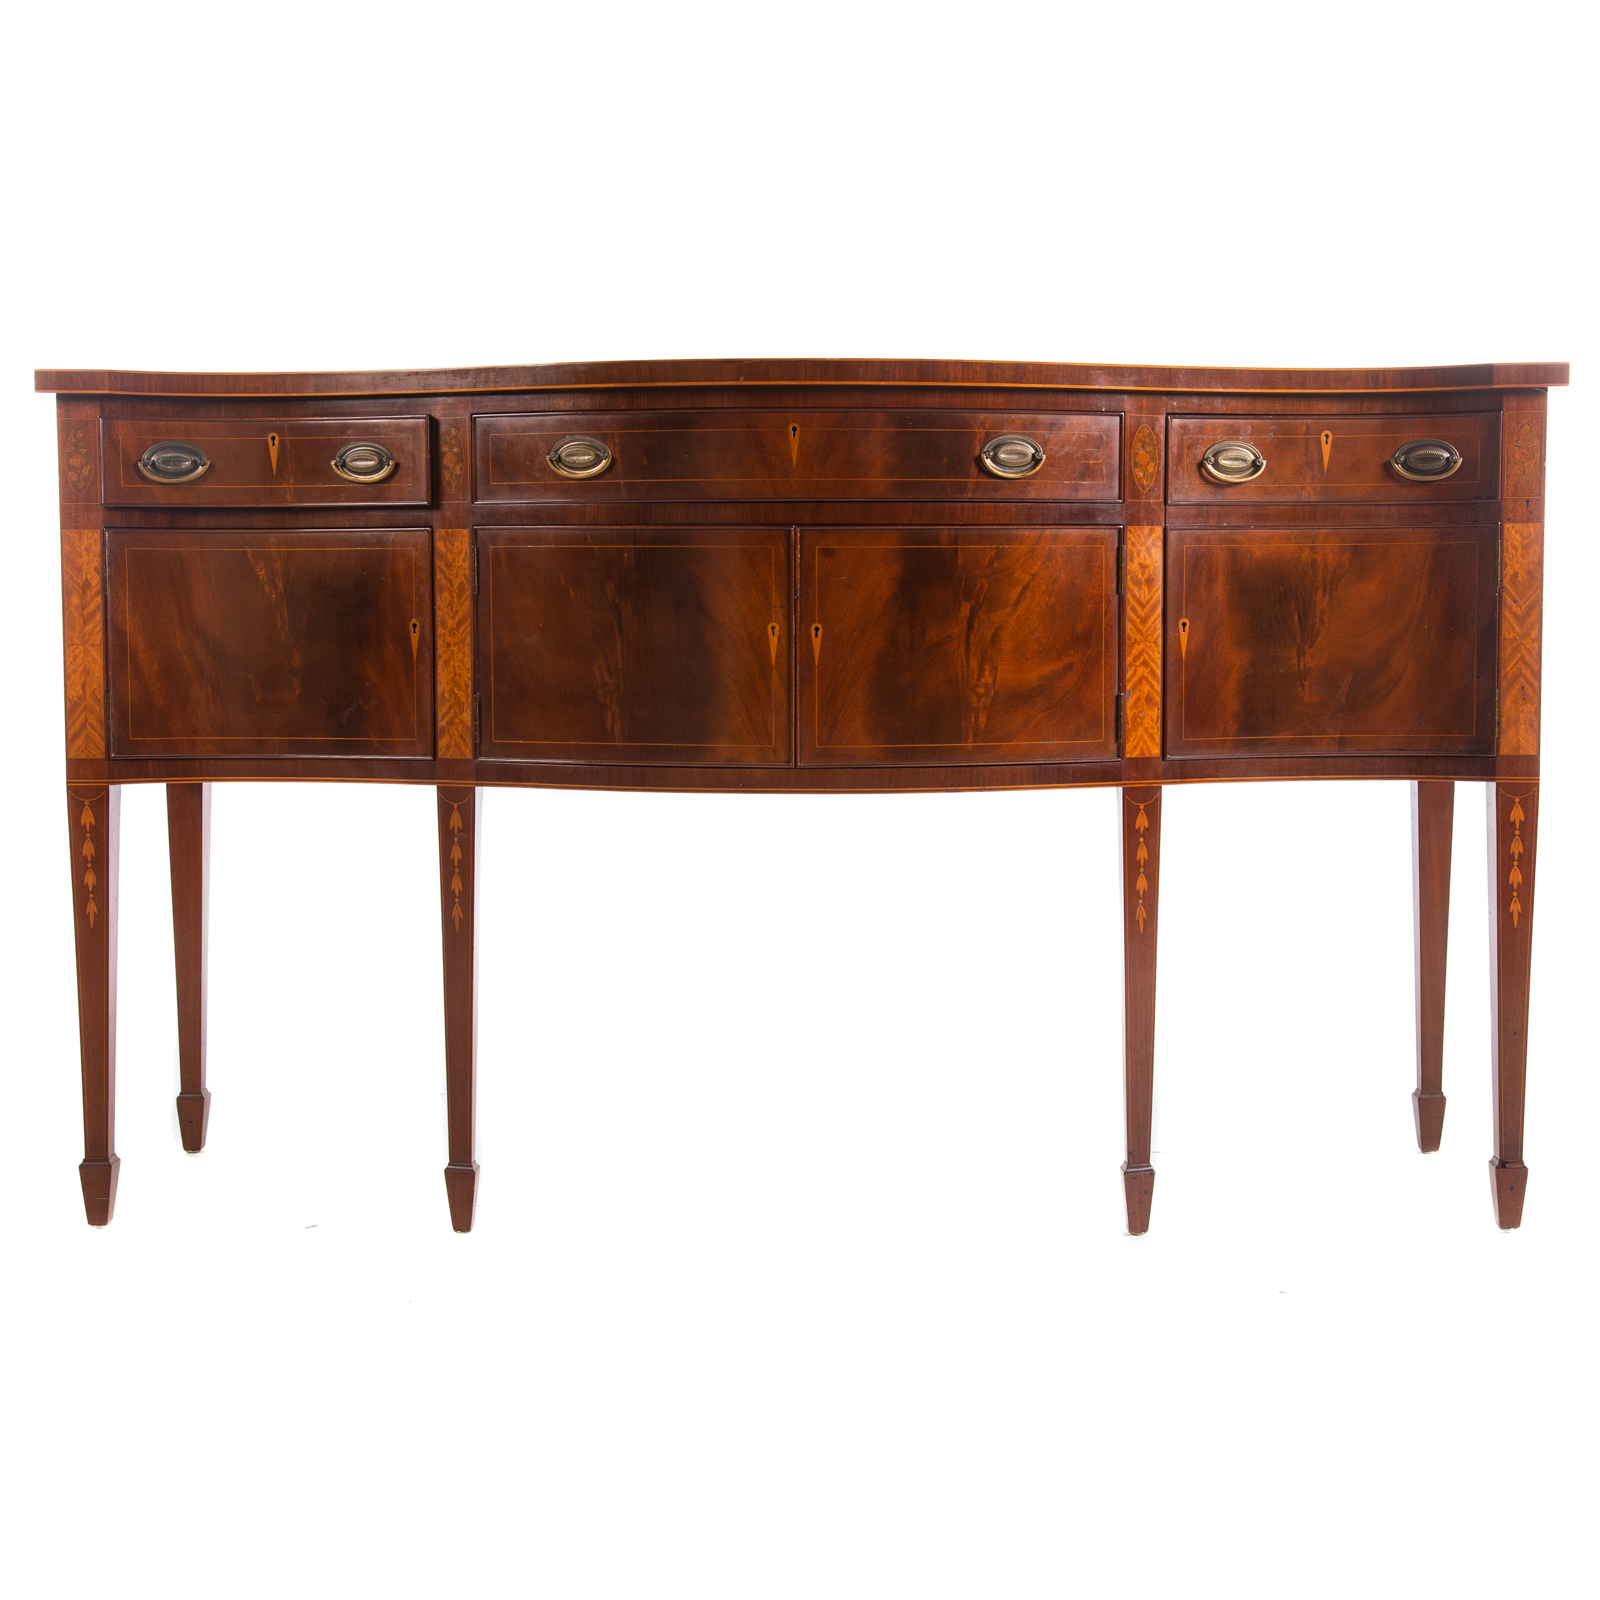 FEDERAL STYLE INLAID SIDEBOARD